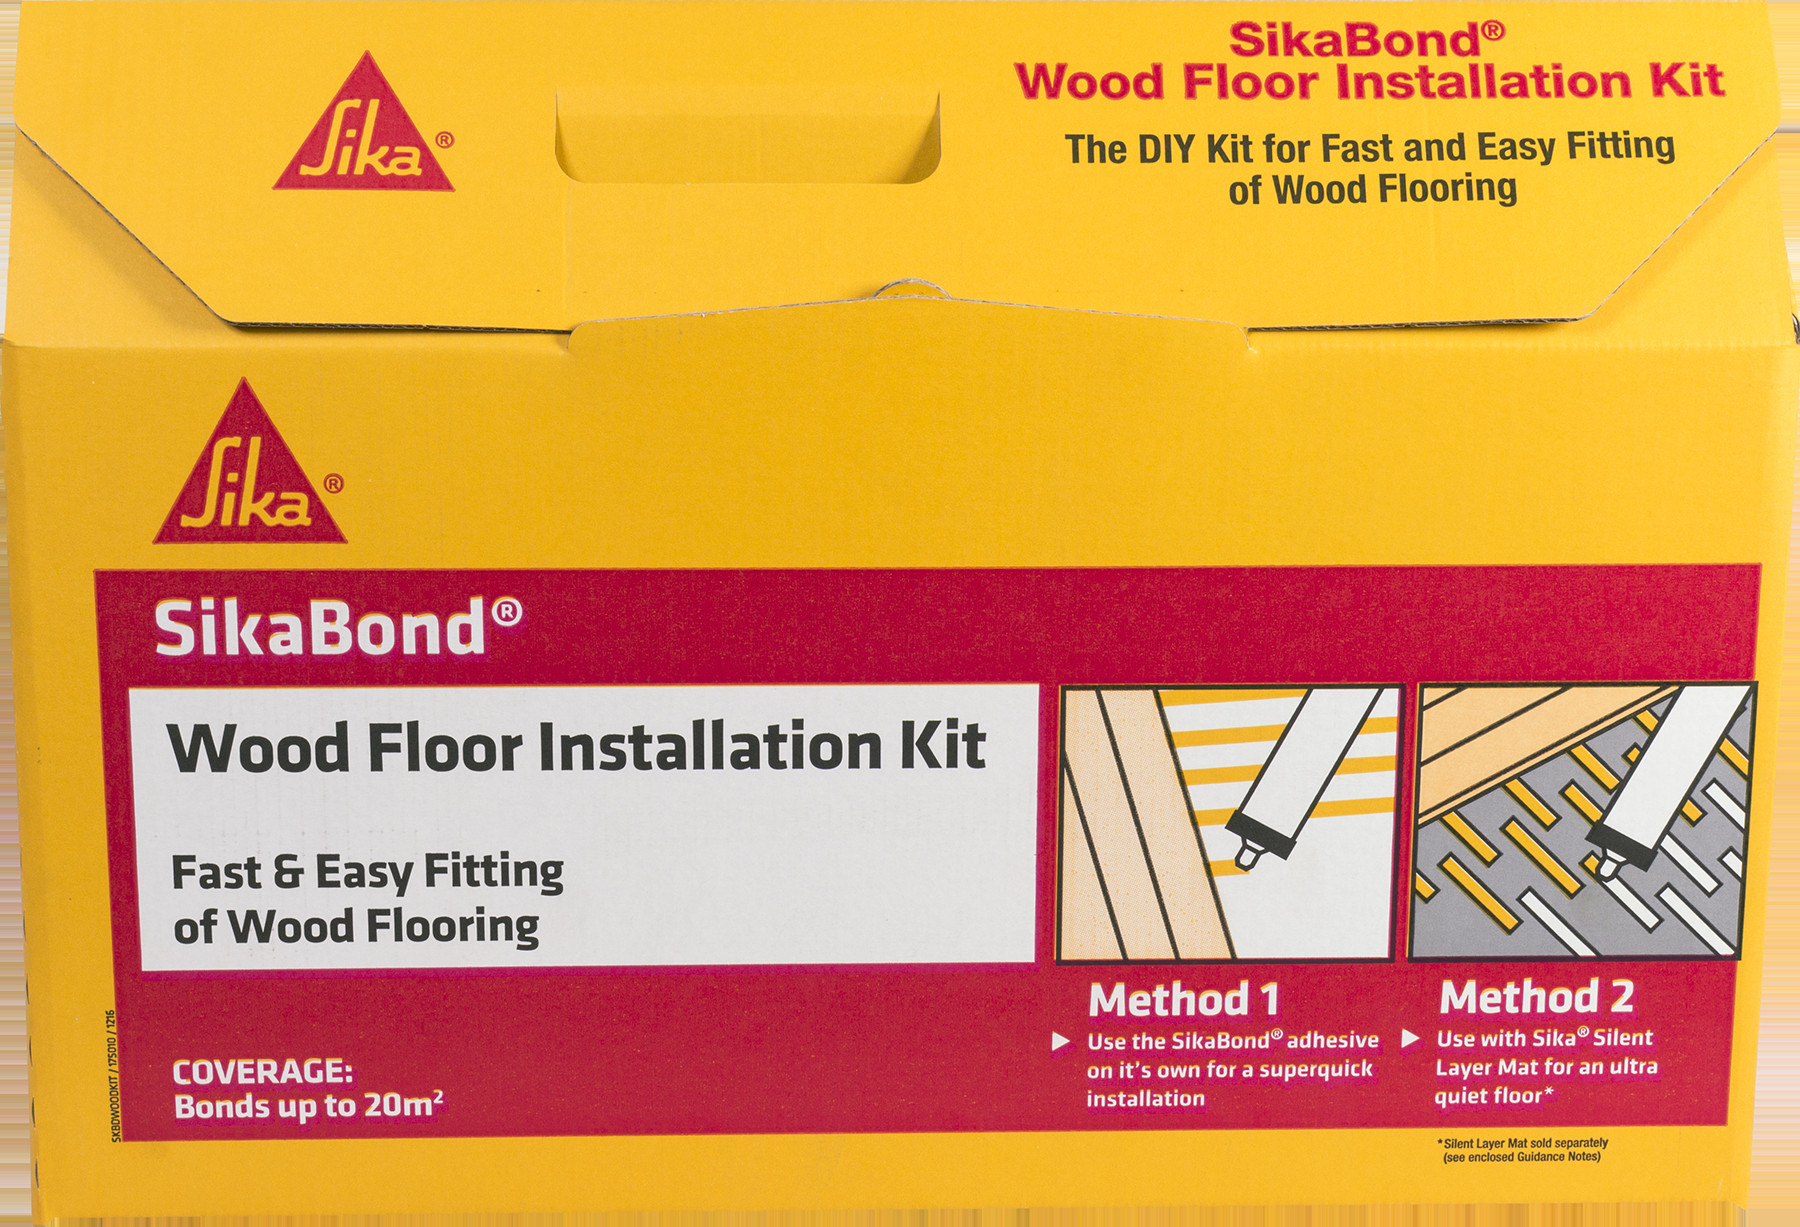 24 Lovely Sika Hardwood Floor Glue 2024 free download sika hardwood floor glue of sikabond wood floor installation kit everbuild with regard to sikabonda application kit is a complete kit to fit up to 20m2 of wood flooring the kit contains 10 x